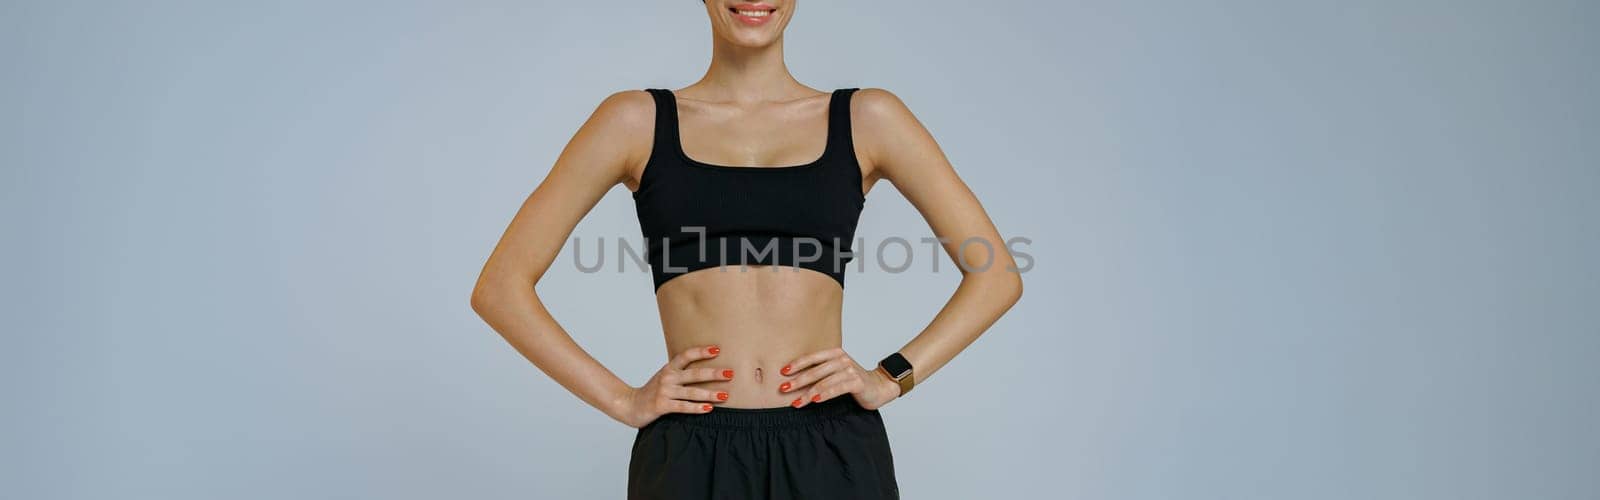 Smiling fitness woman wearing sportswear looking at camera on studio background. High quality photo